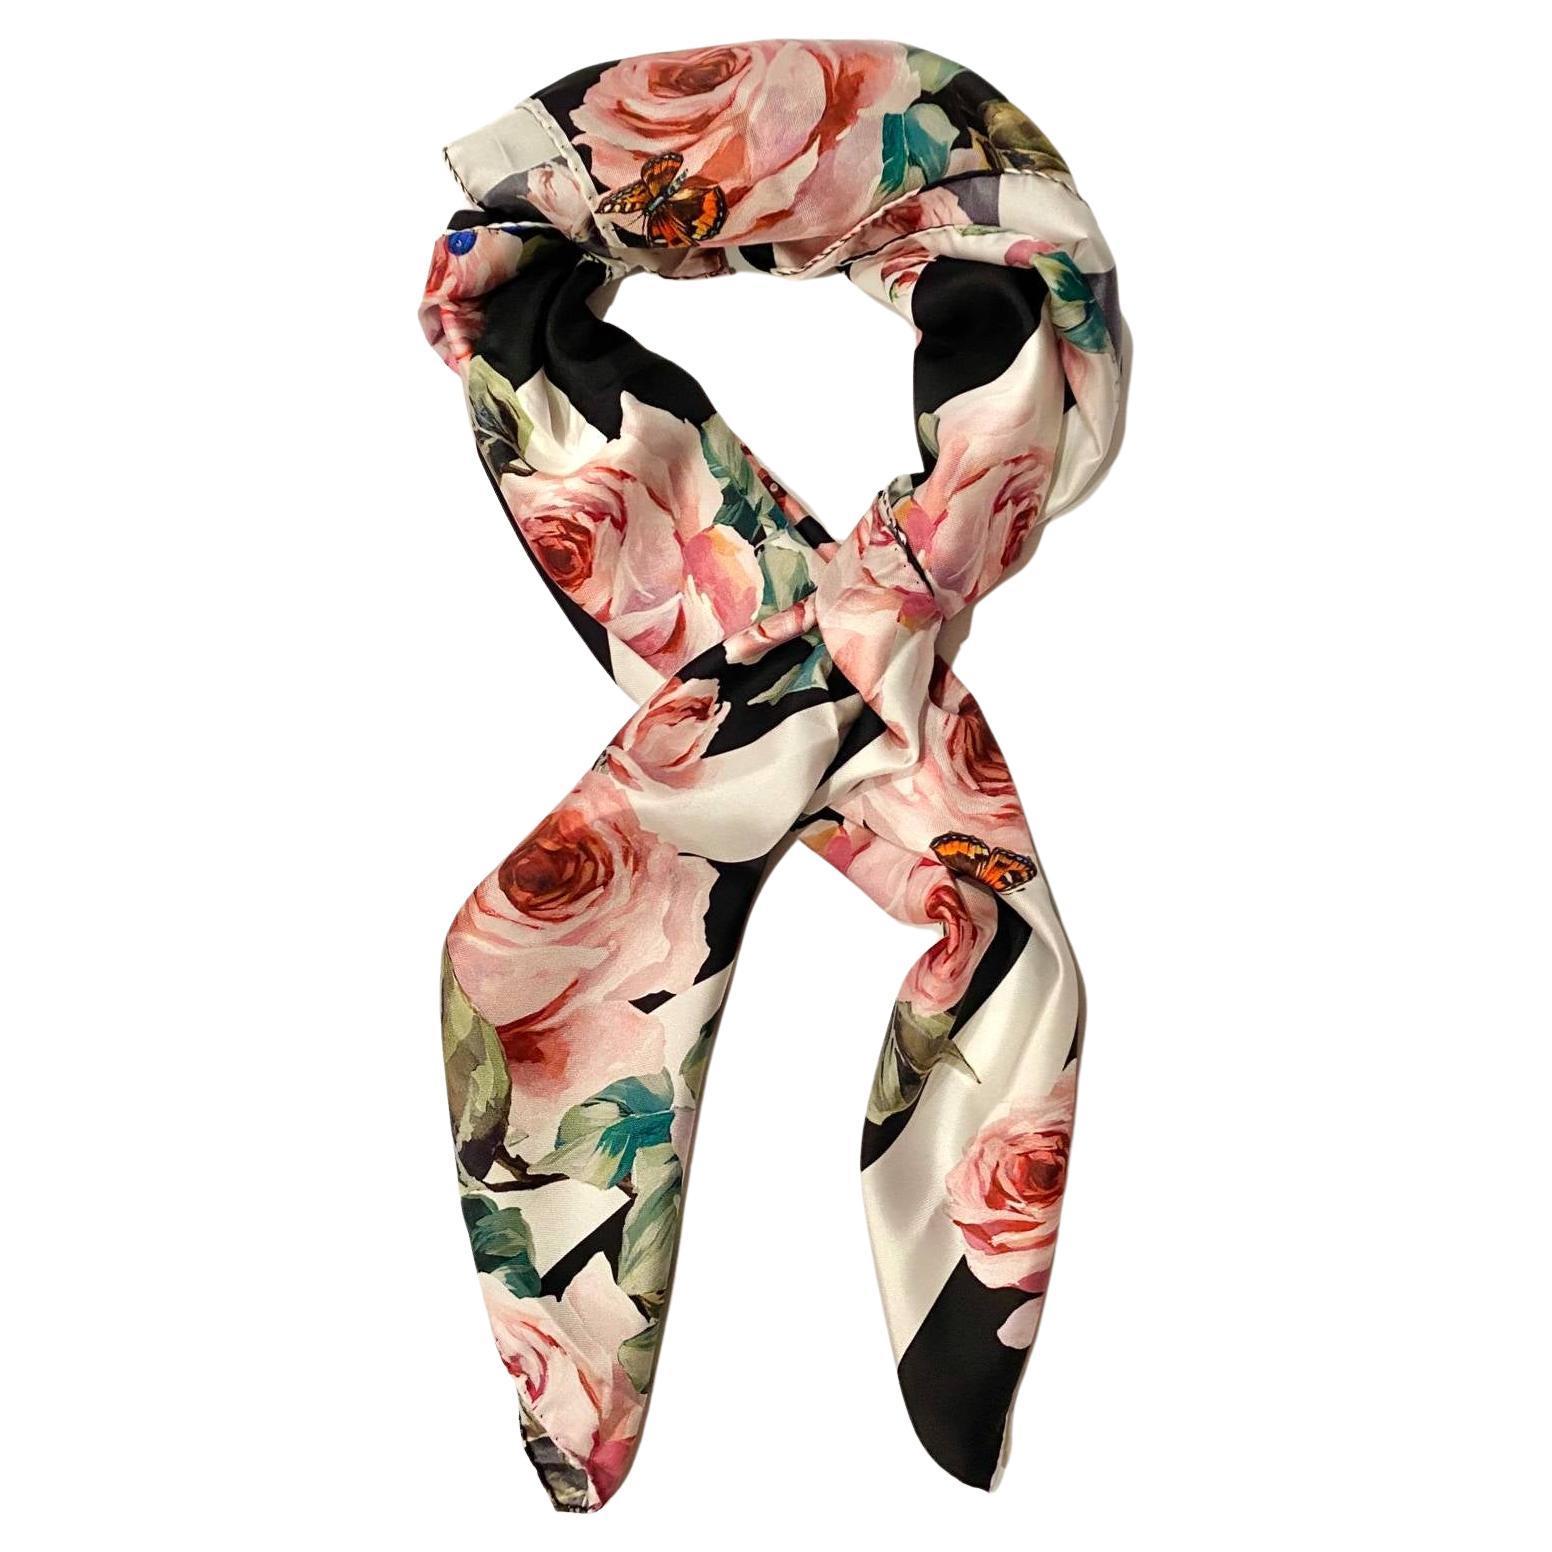 Dolce & Gabbana twill scarf on black and white stripe background and pink rose print, hand stitched, Made in Ital This scarf is crafted with care and attention to detail, offering a luxurious and elegant look. Soft and light in weight, it's perfect